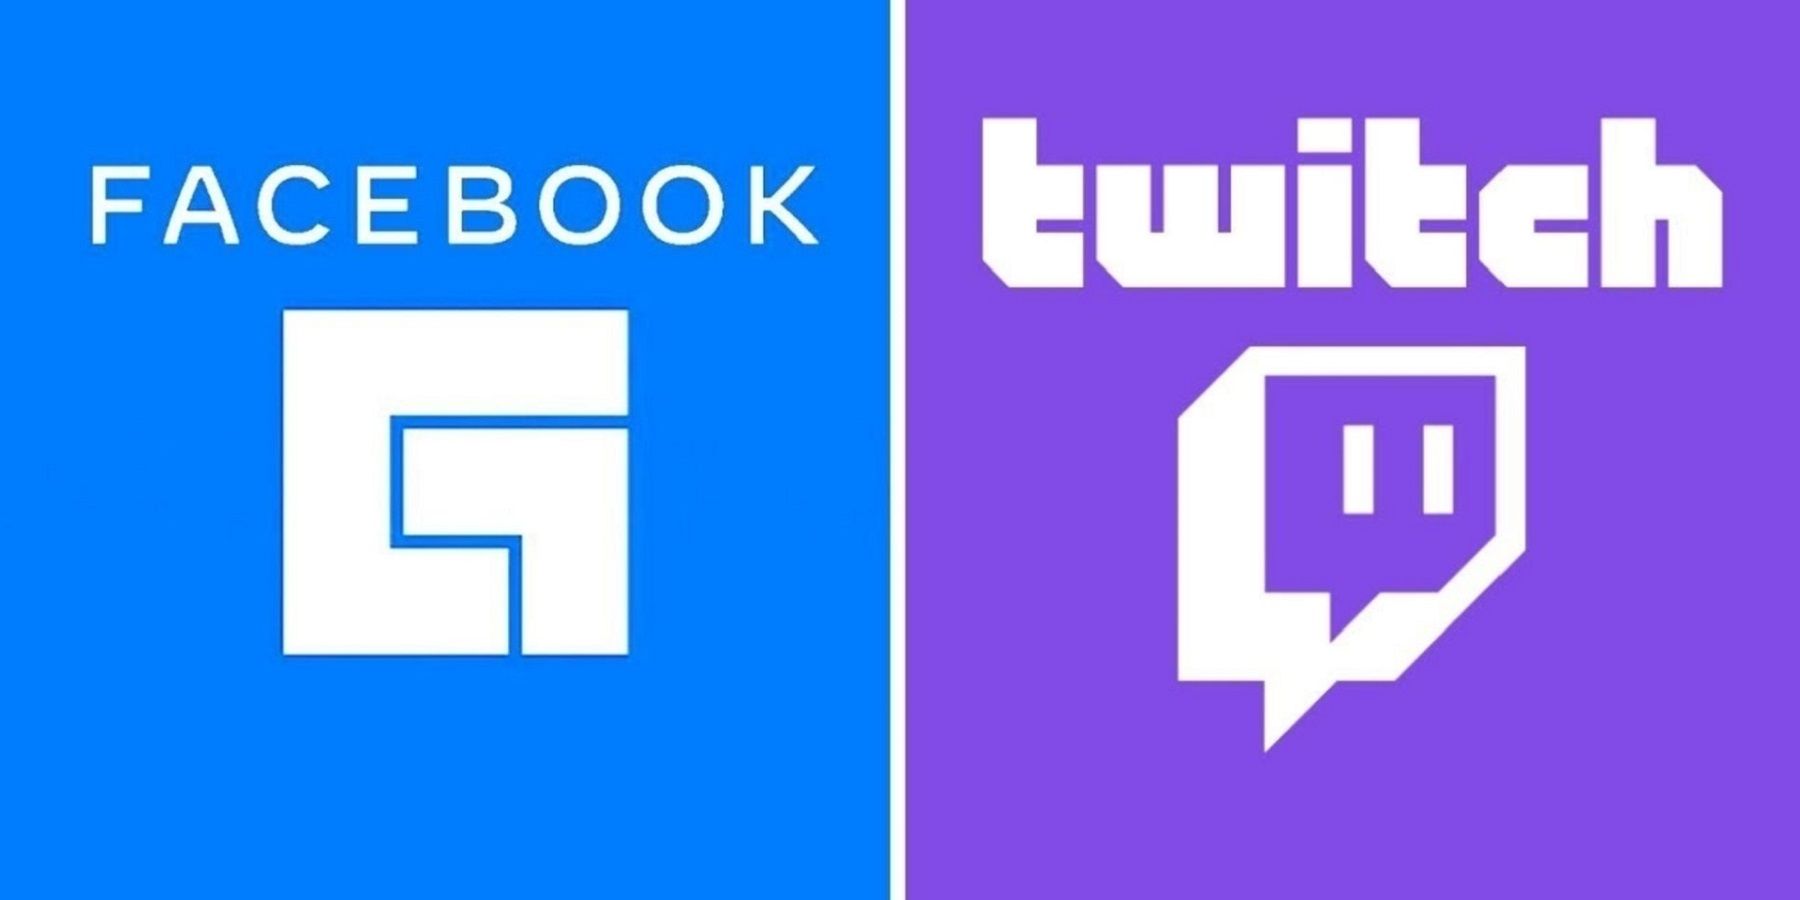 The Facebook Gaming logo next to the Twitch logo.